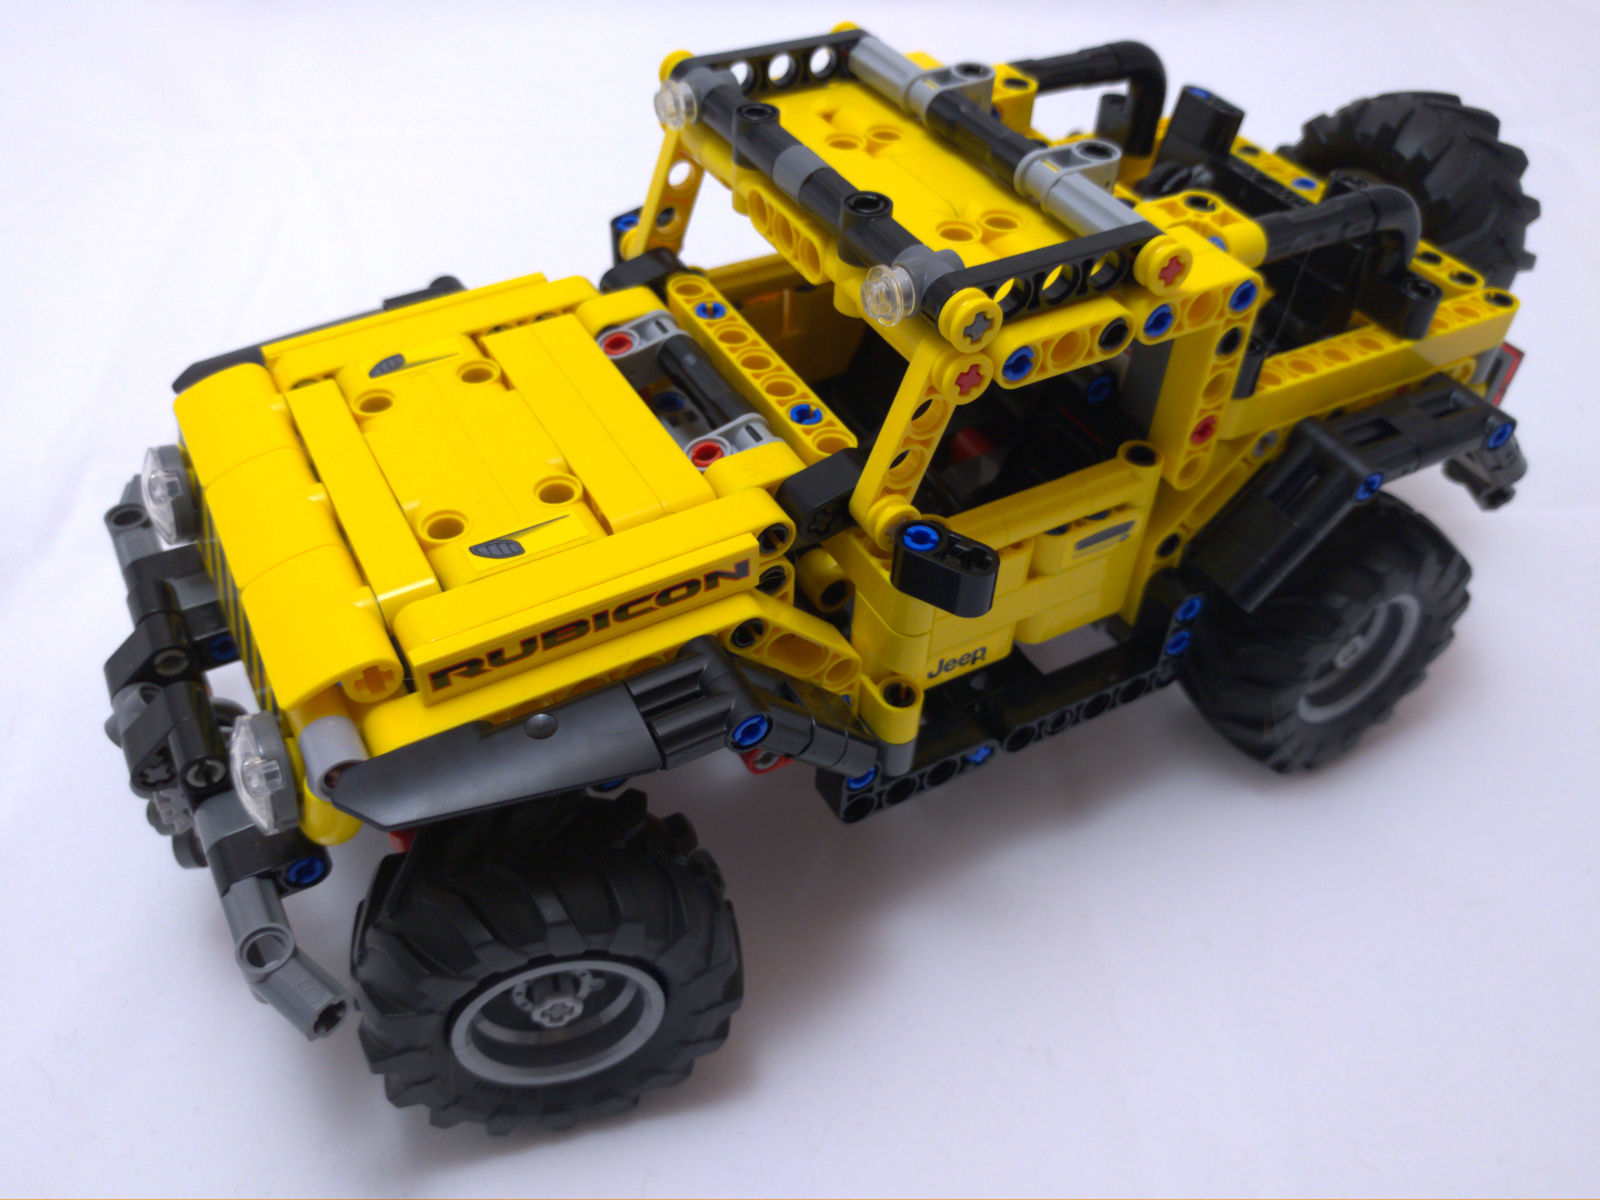 LEGO® Technic review: 42122 Jeep Wrangler | New Elementary: LEGO® parts,  sets and techniques